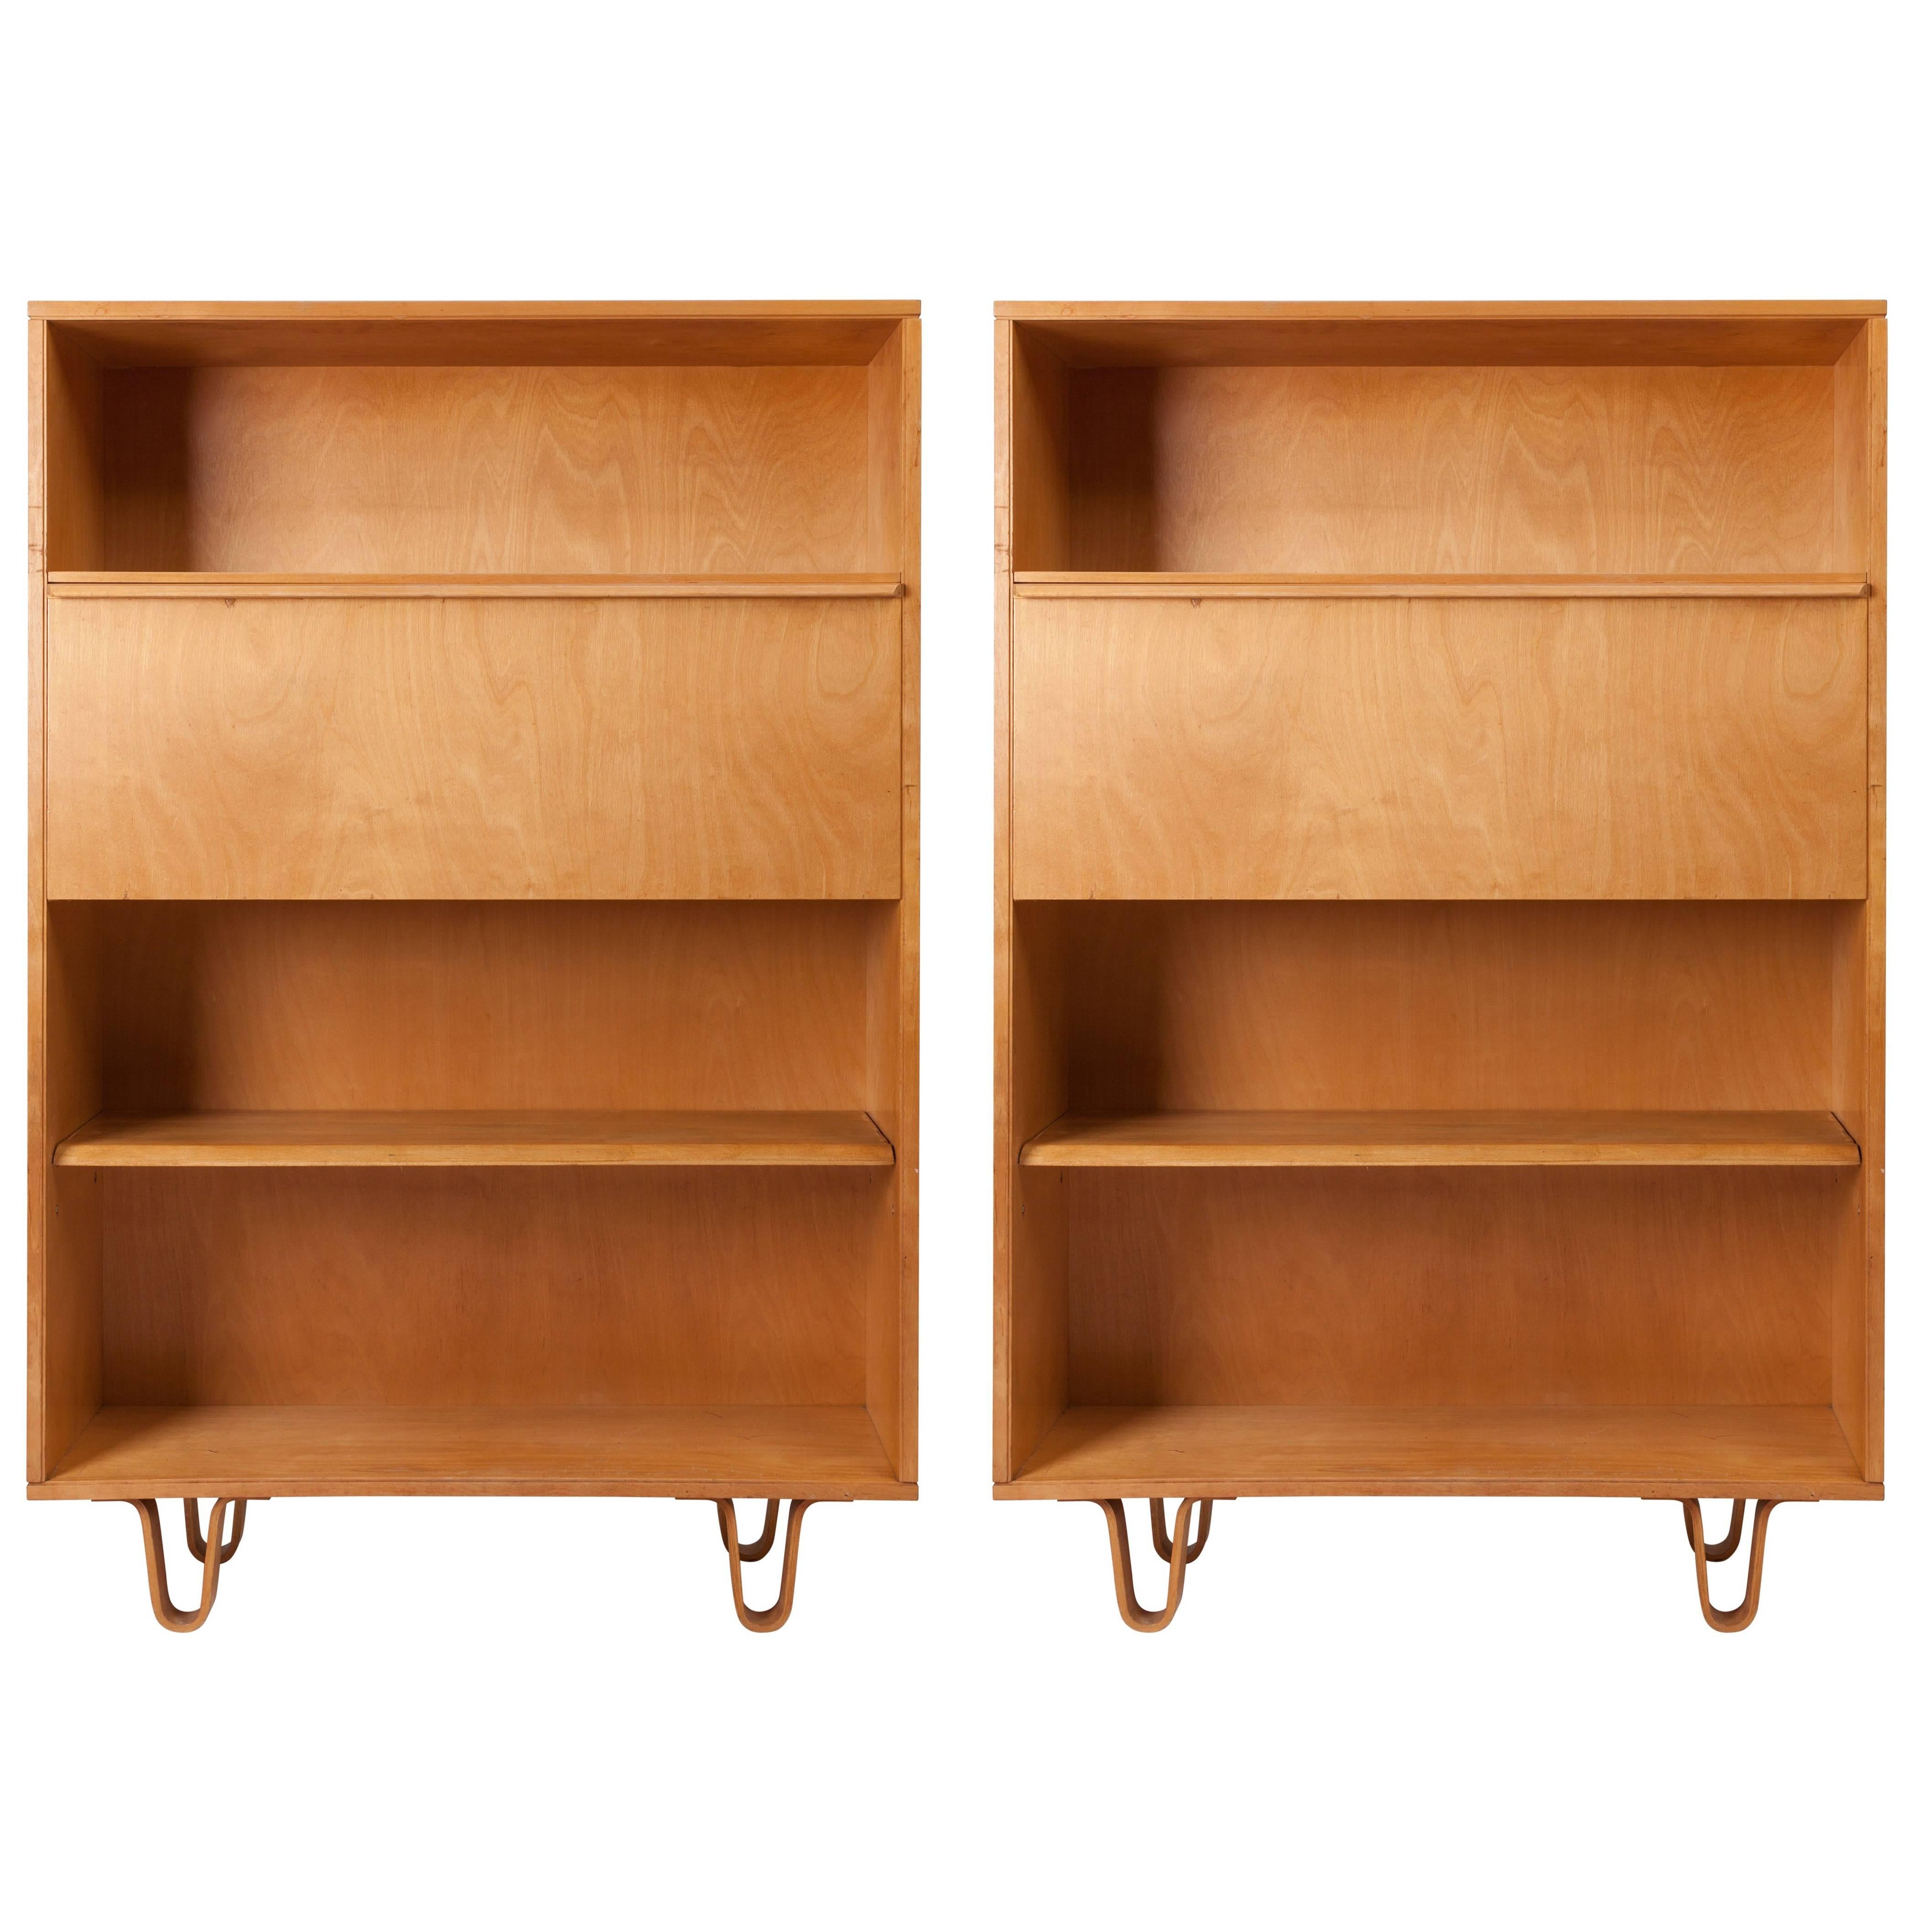 Midcentury Bookcases slash Writing Desks BB02 by Cees Braakman for Pastoe